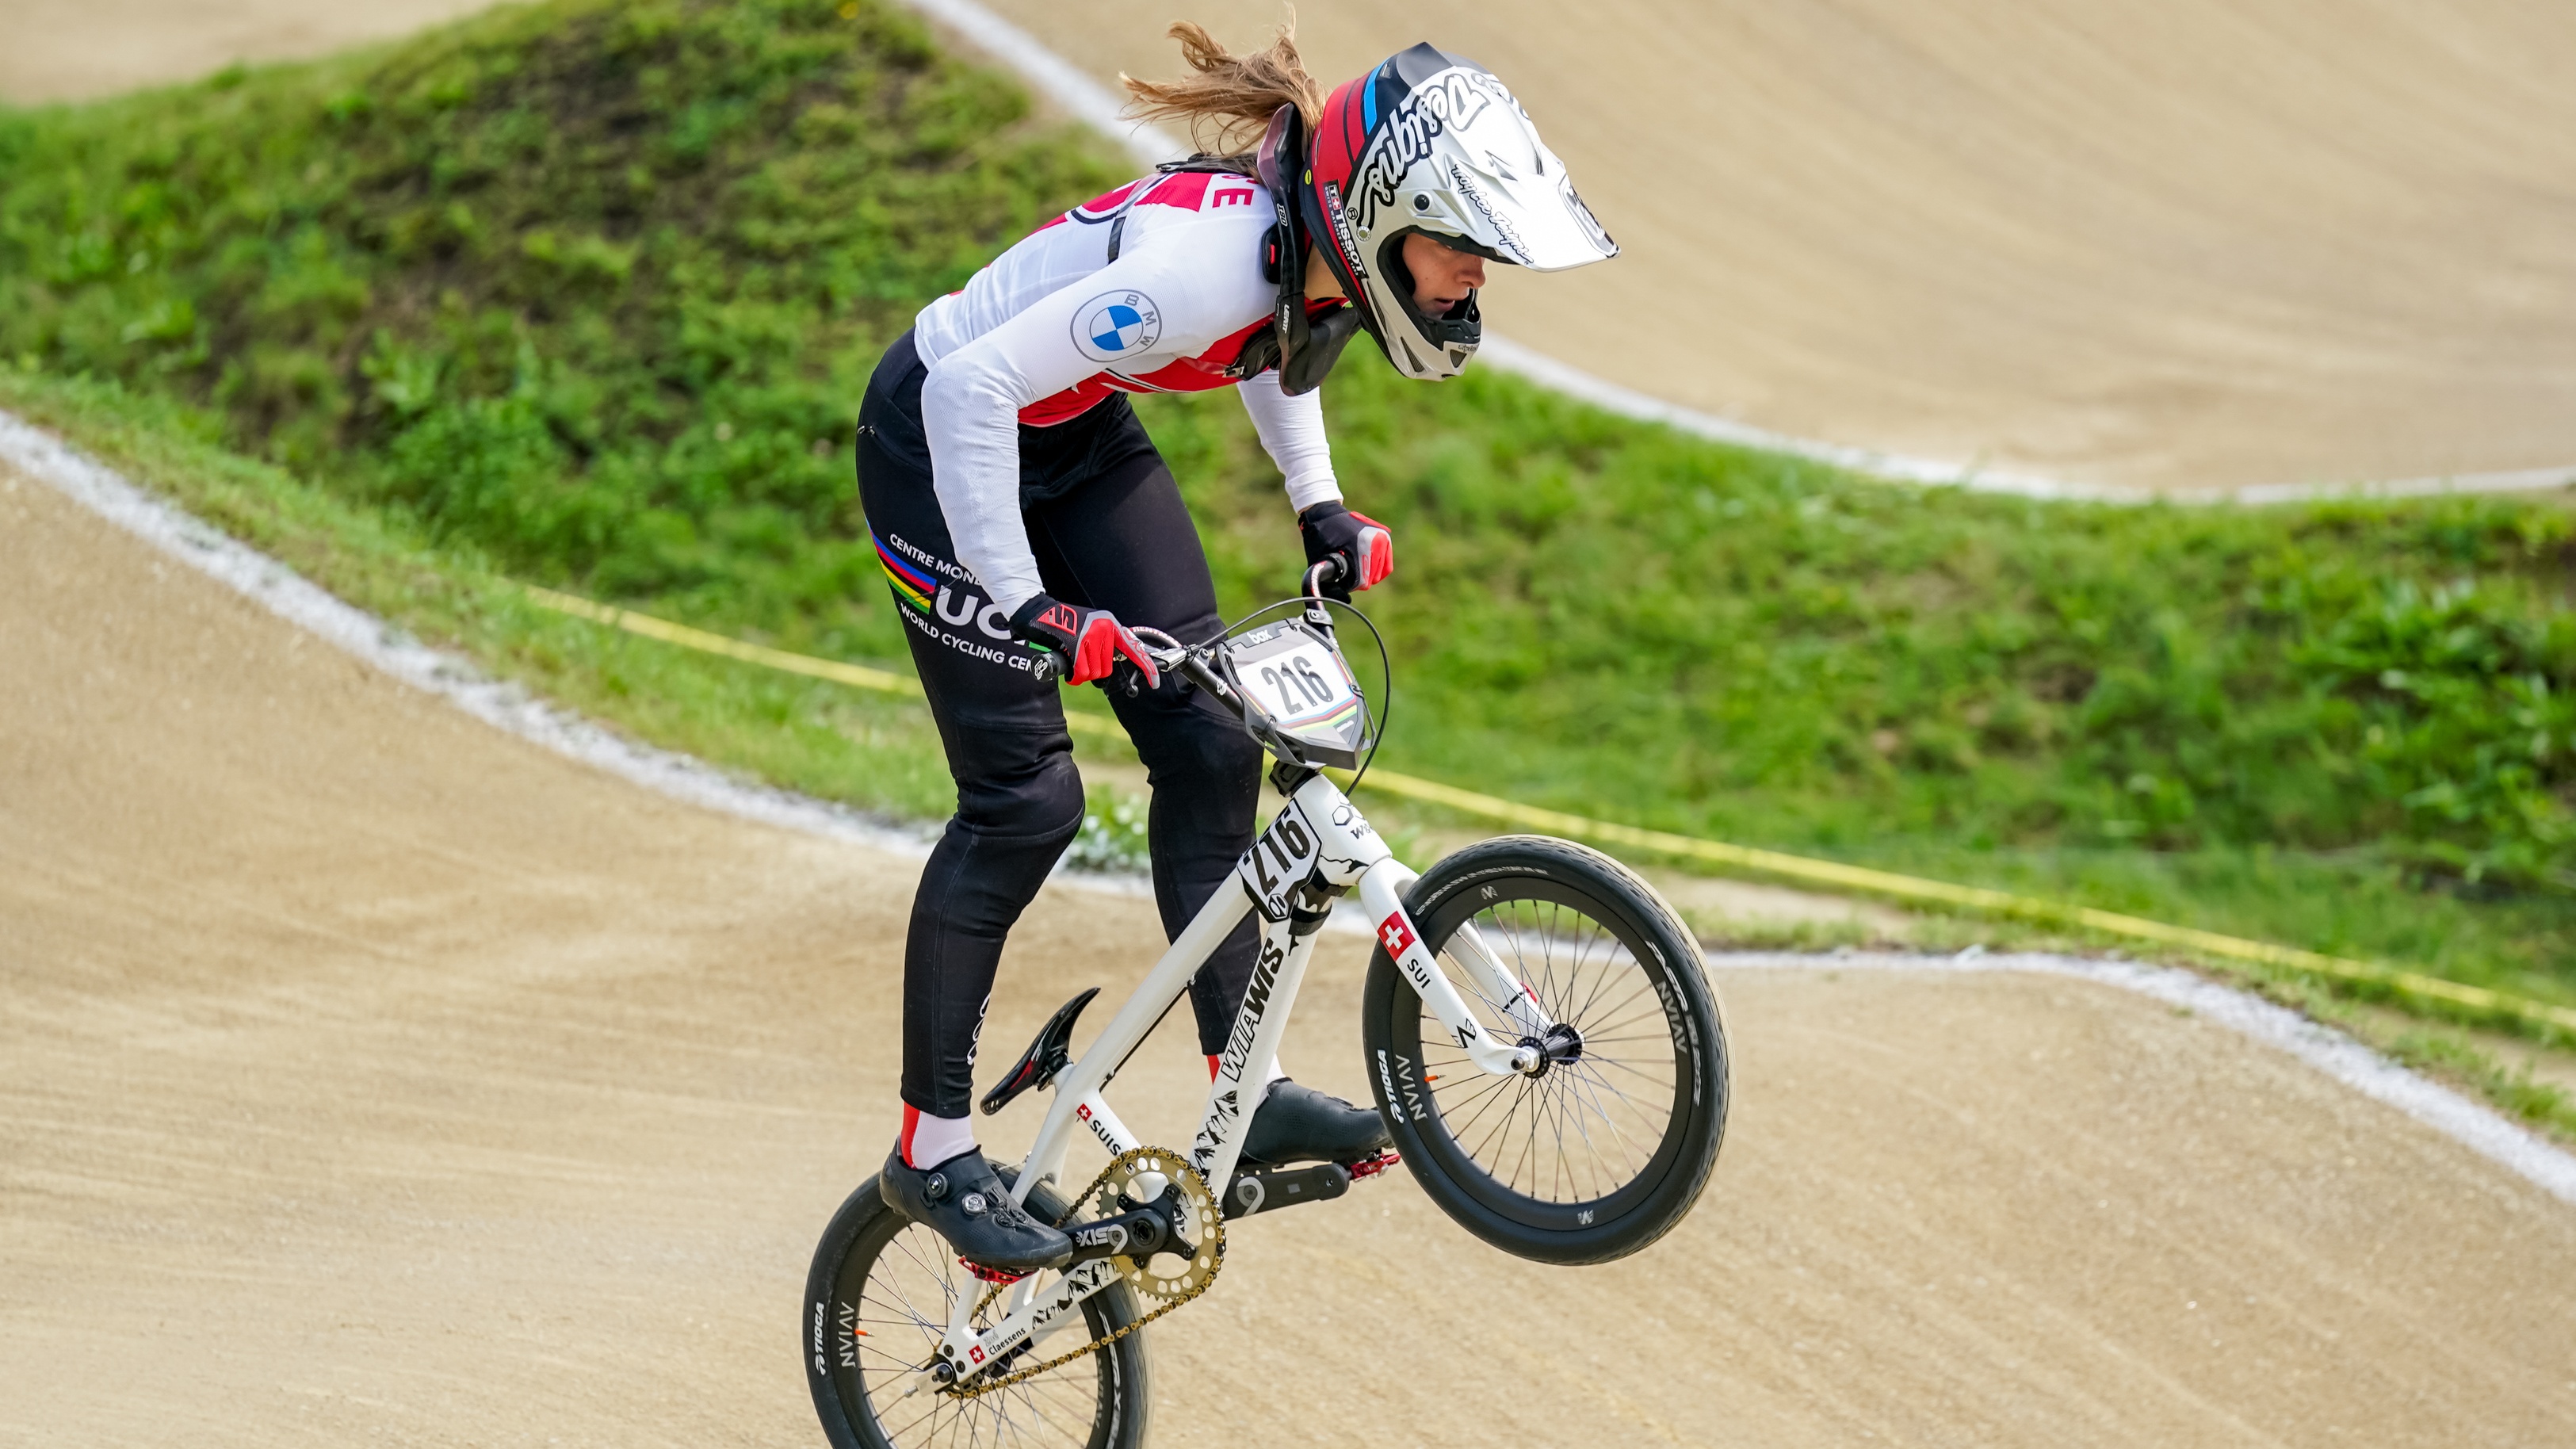 How to watch BMX World Championships 2023 live stream for free from anywhere